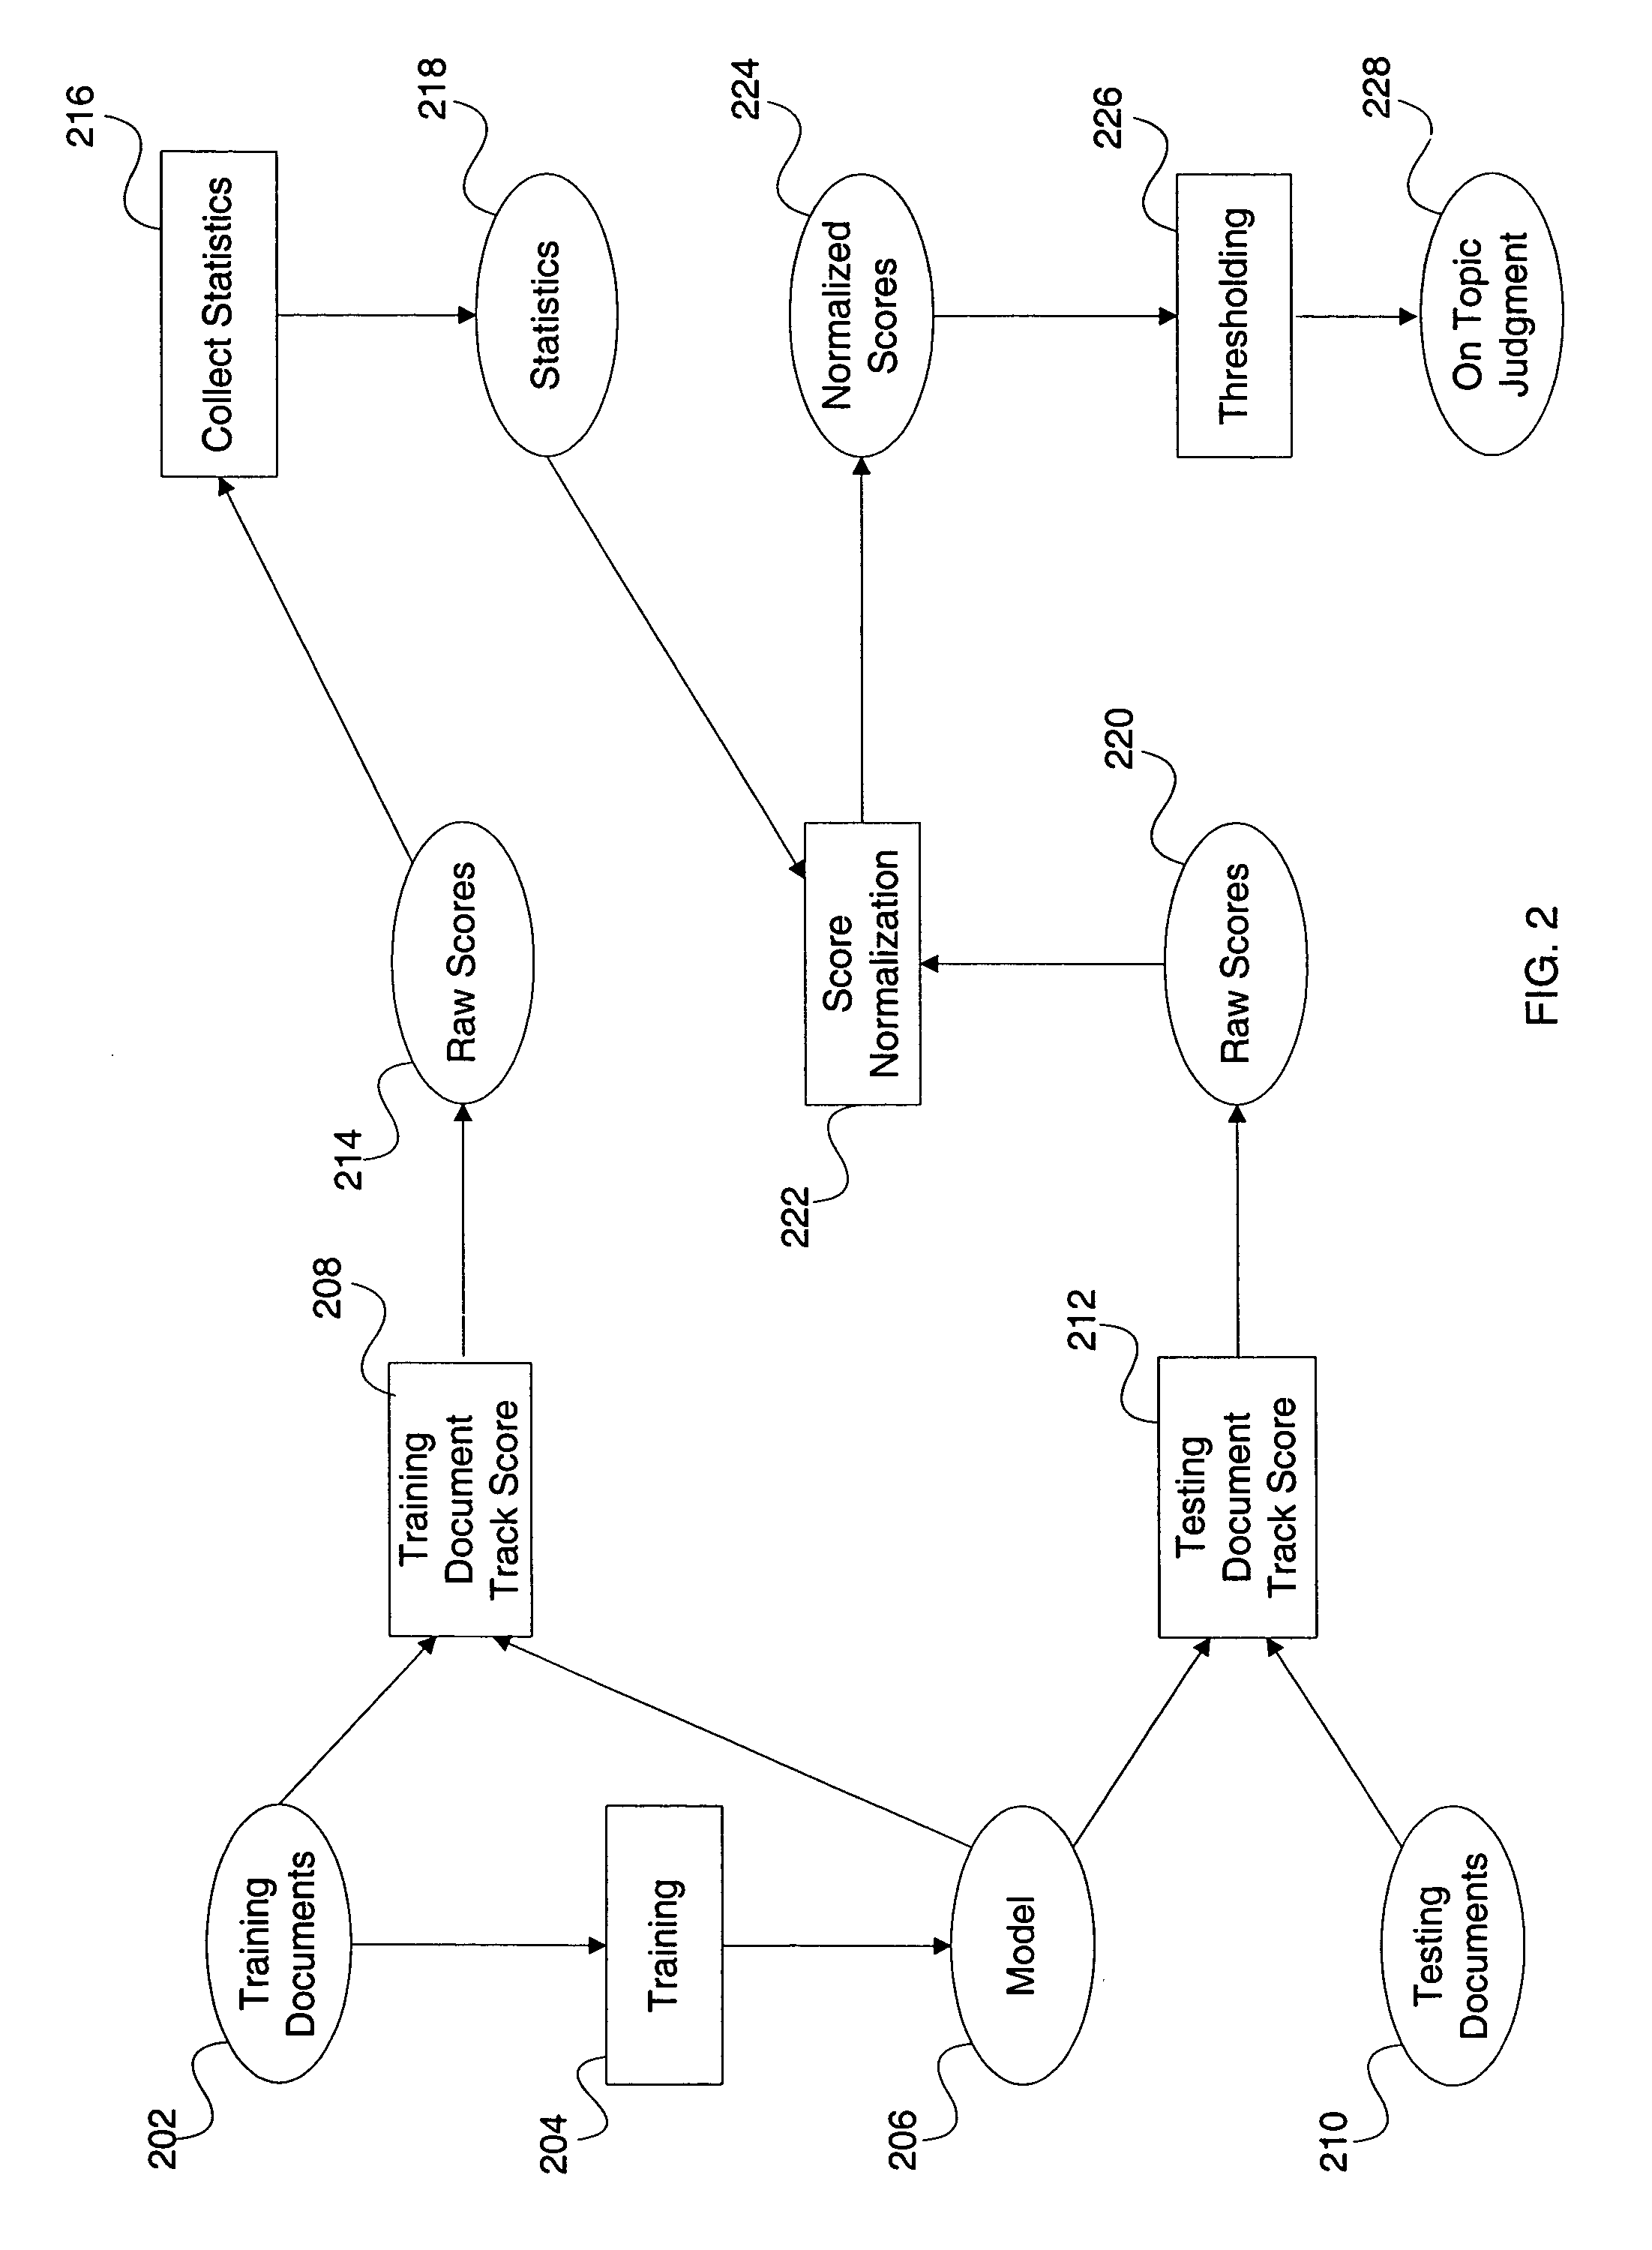 Method and apparatus for score normalization for information retrieval applications